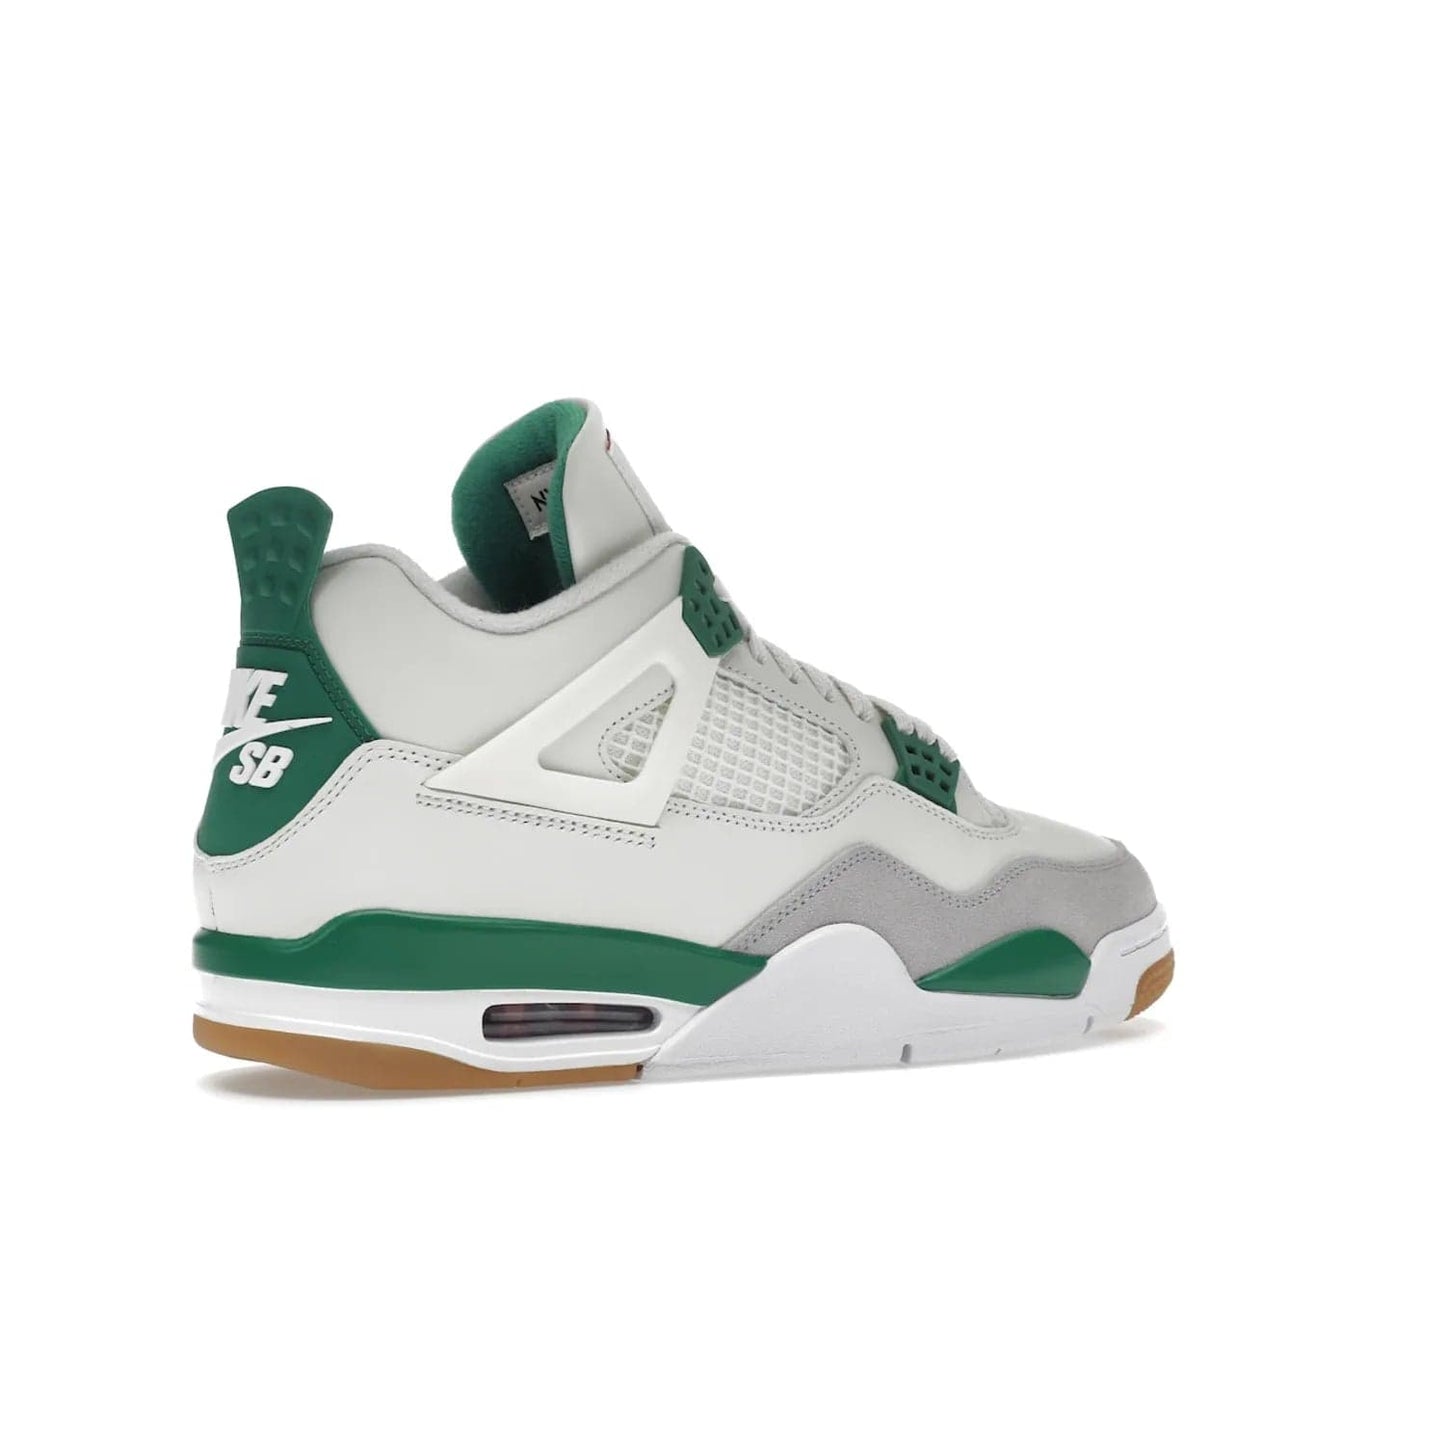 Jordan 4 Retro SB Pine Green - Image 34 - Only at www.BallersClubKickz.com - A white leather upper combined with a Neutral Grey suede mudguard gives this limited Air Jordan 4 Retro SB Pine Green sneaker its unmistakable style. Released March 20, 2023, the Jordan 4 Retro SB features a white and Pine Green midsole plus a red air unit with a gum outsole for grip. The perfect blend of Nike SB skateboarding and Jordan 4 classic design.